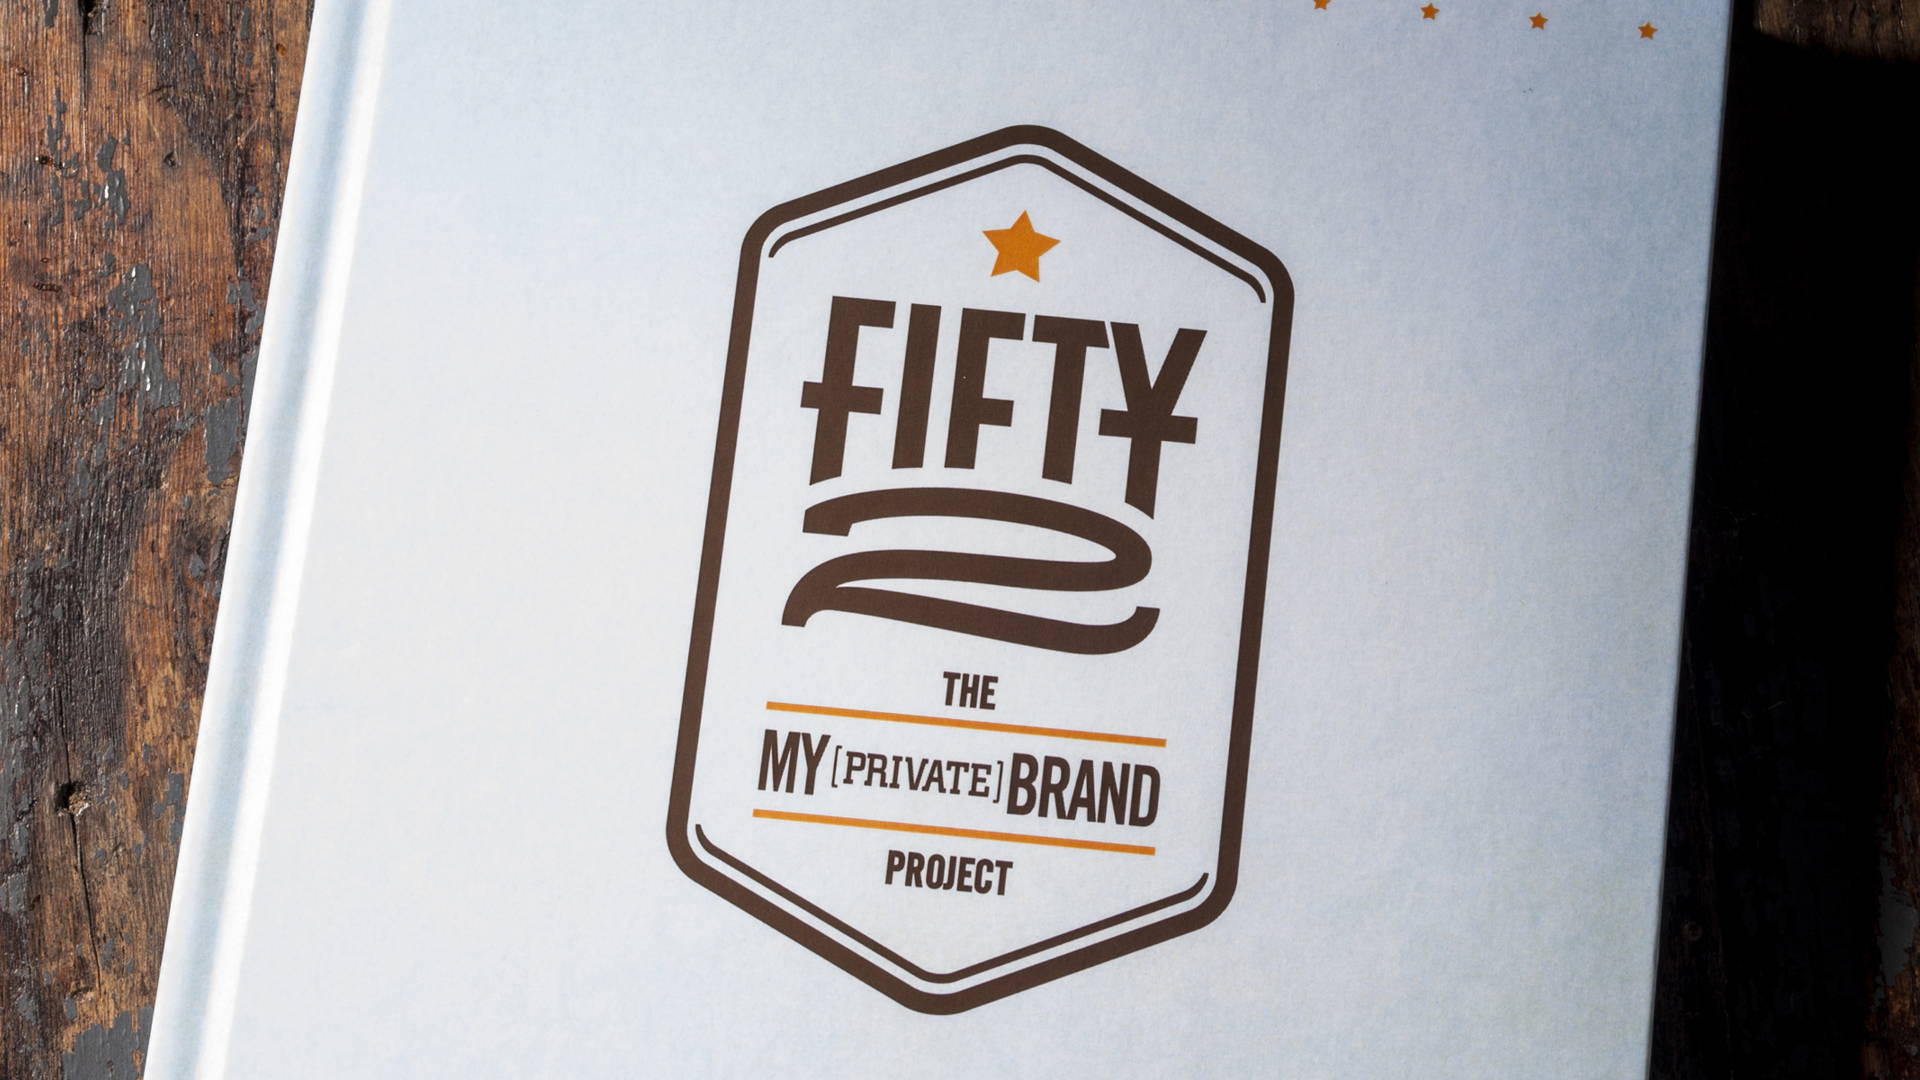 Featured image for Fifty2: The My Private Brand Project